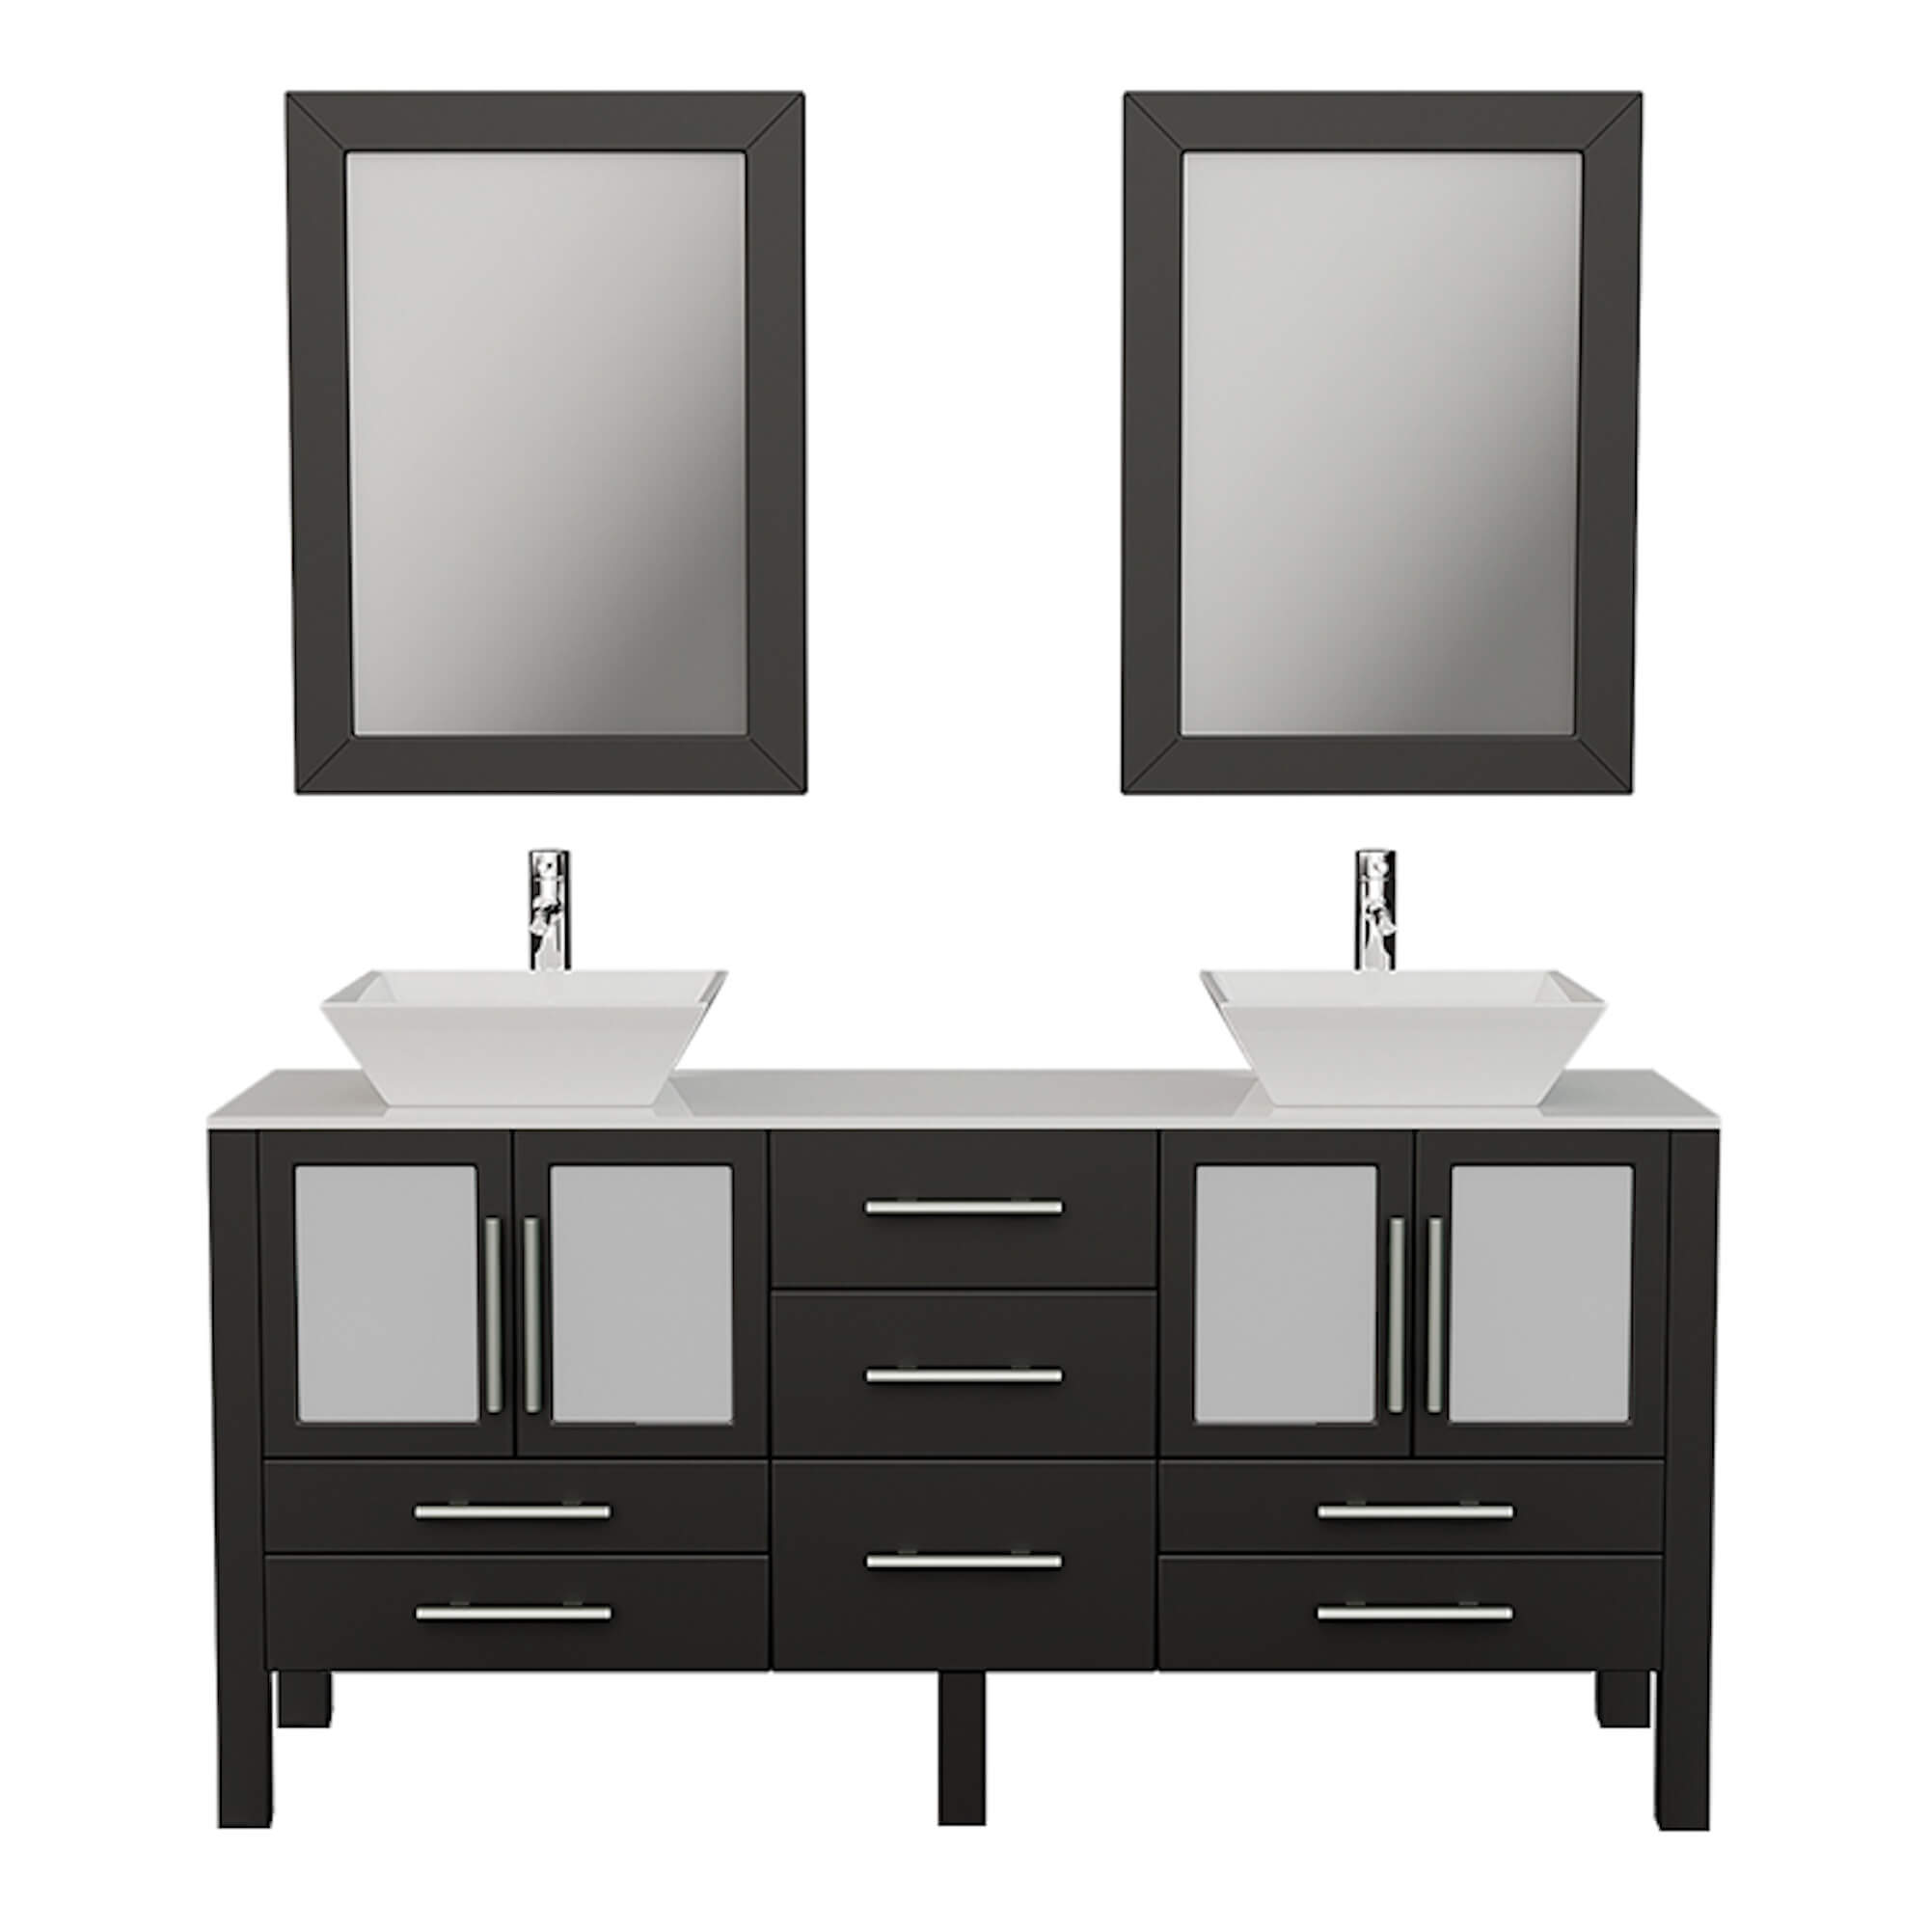 Cambridge Plumbing 8119F 63" Double Bathroom Vanity in Espresso with White Porcelain Top and Vessel Sinks, Matching Mirrors, Front View with Chrome Faucets